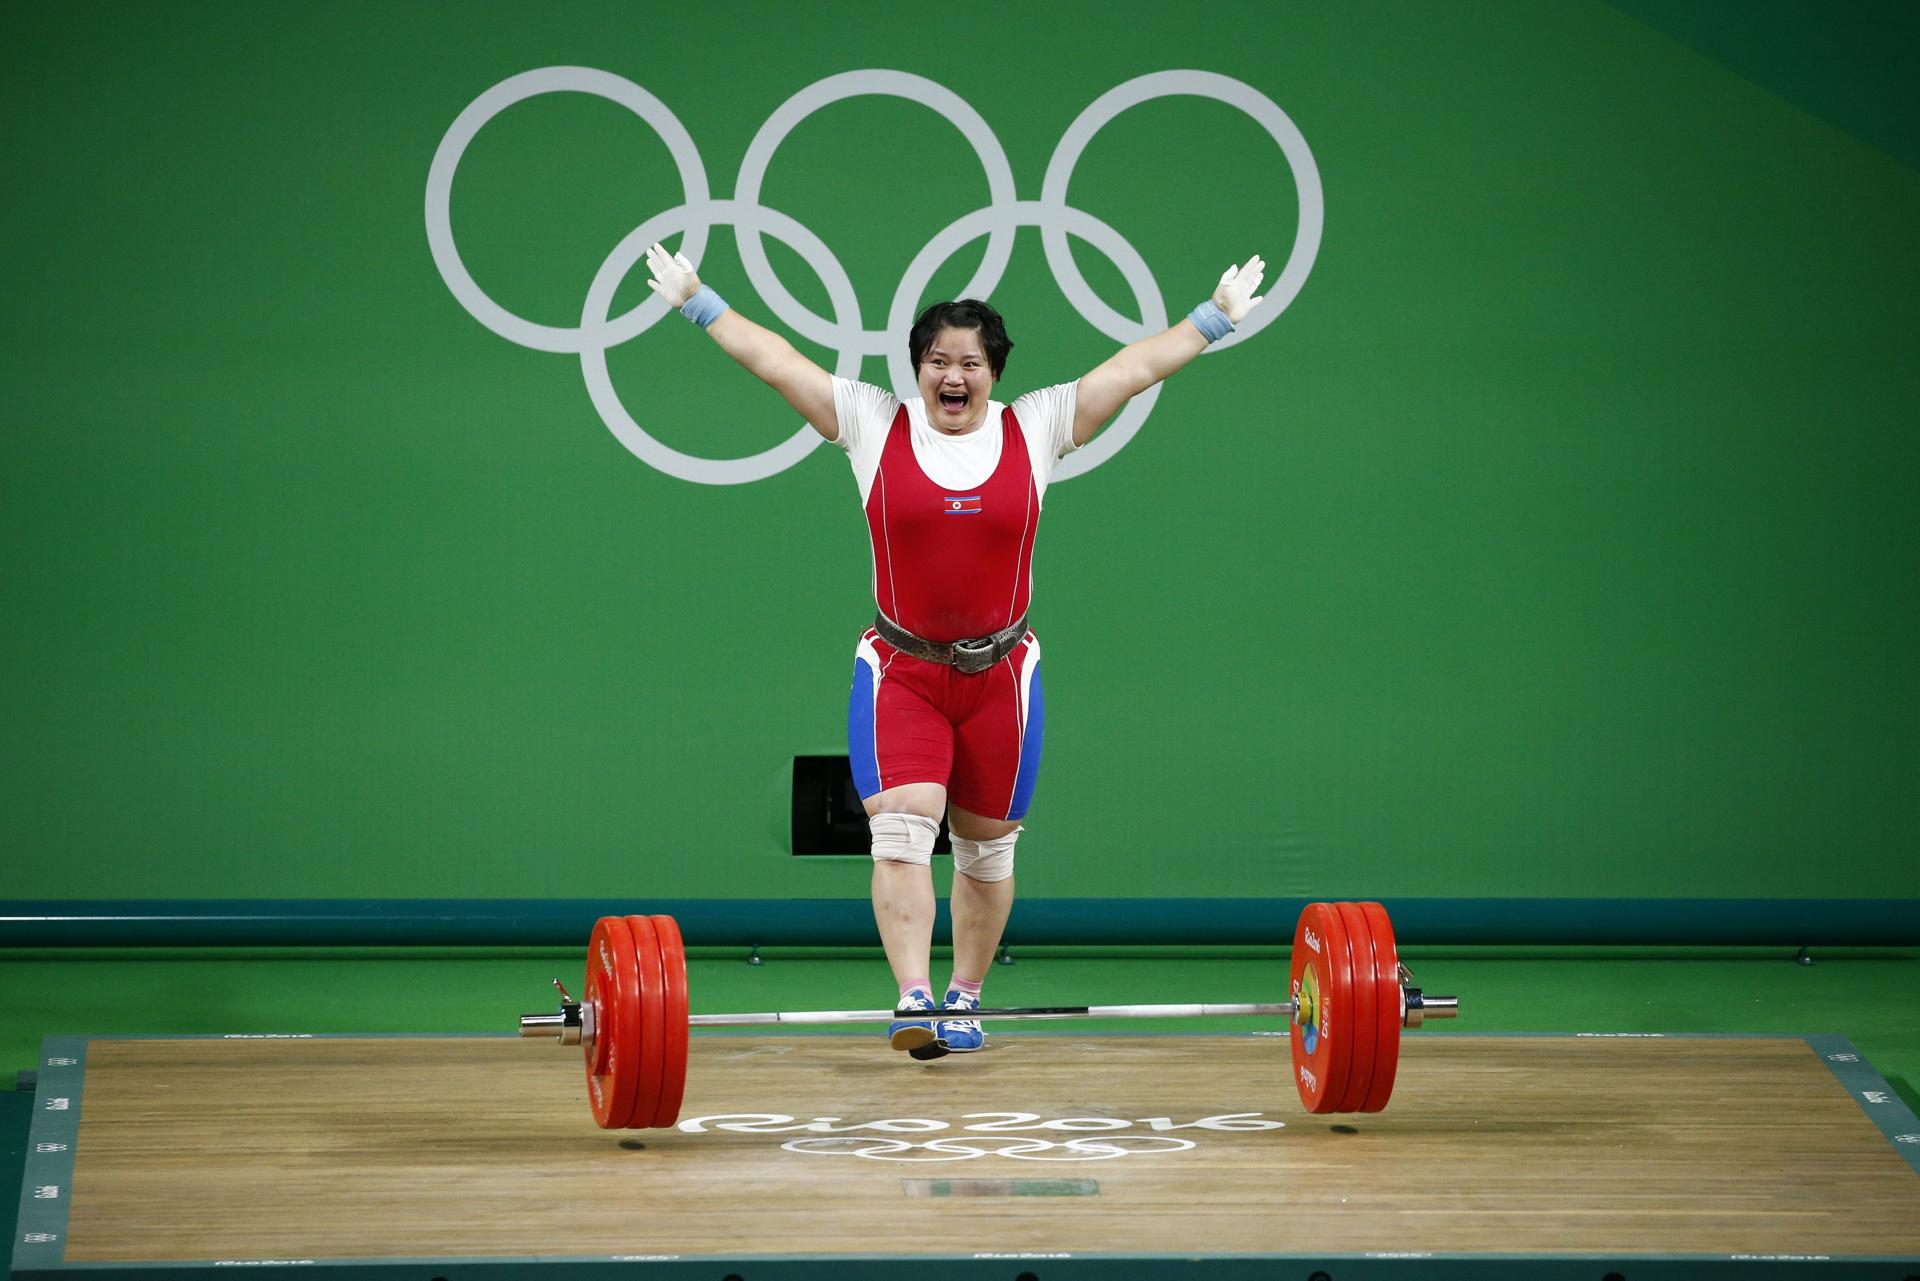 Kim Kuk Hyang of North Korea makes an attempt during the women's +75kg category of the Rio 2016 Olympic Games Weightlifting events at the Riocentro in Rio de Janeiro, Brazil, 14 August 2016. EFE-EPA FILE/LARRY W. SMITH
